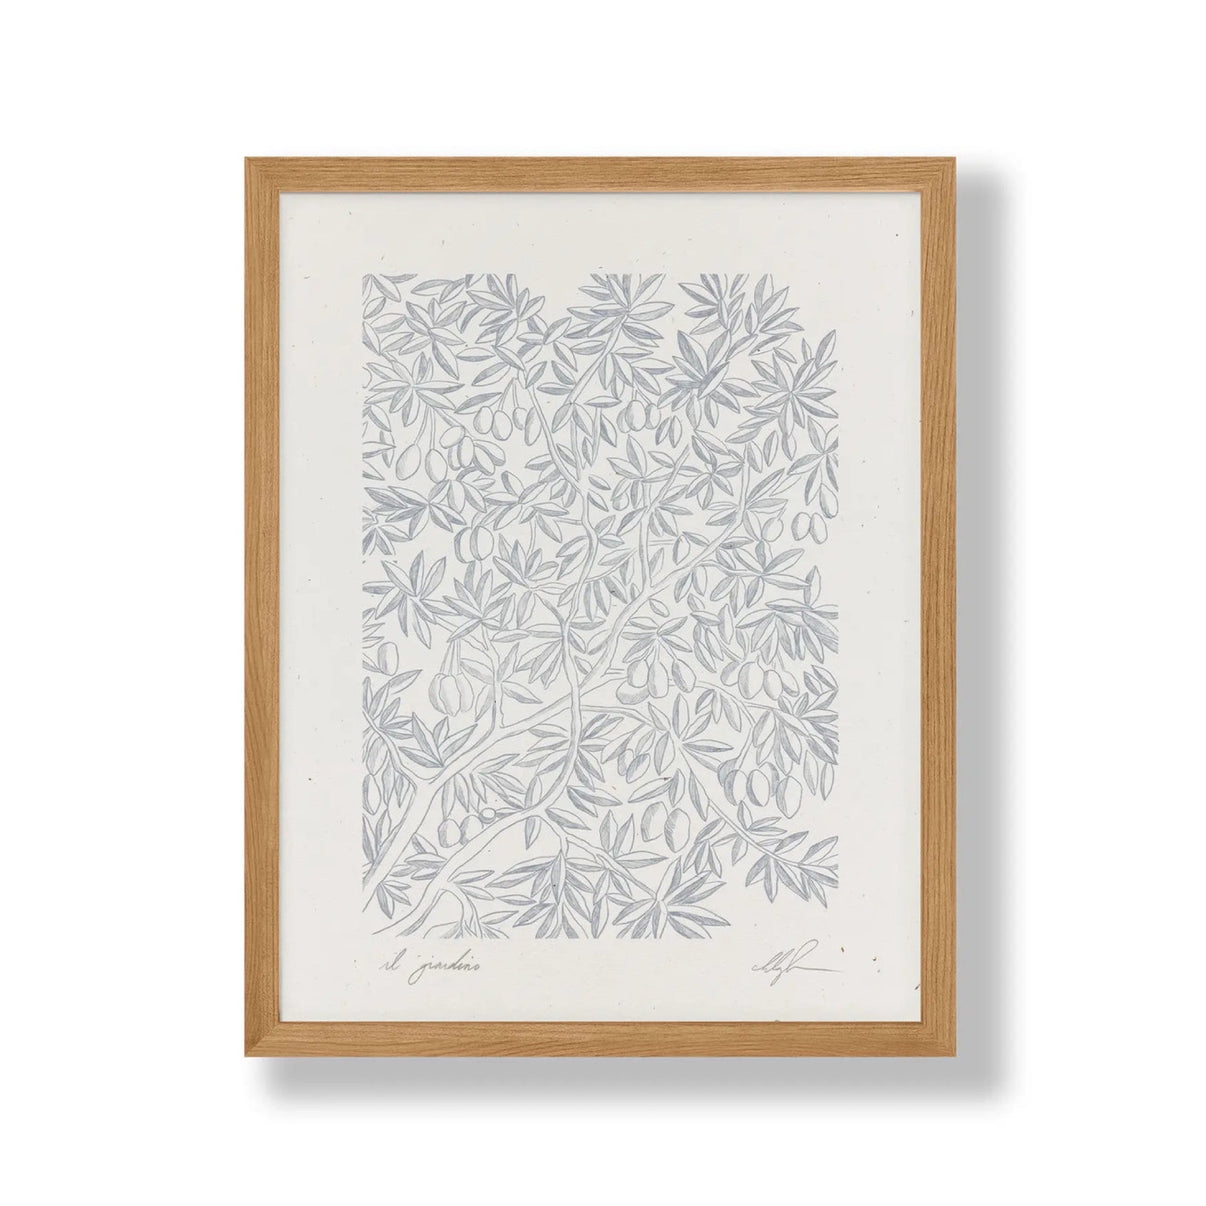 Il Giardino by Coco Shalom.  Prints are made with 100% recycled paper, containing 30% post consumer waste, produced with 100% green power  and 0% BS